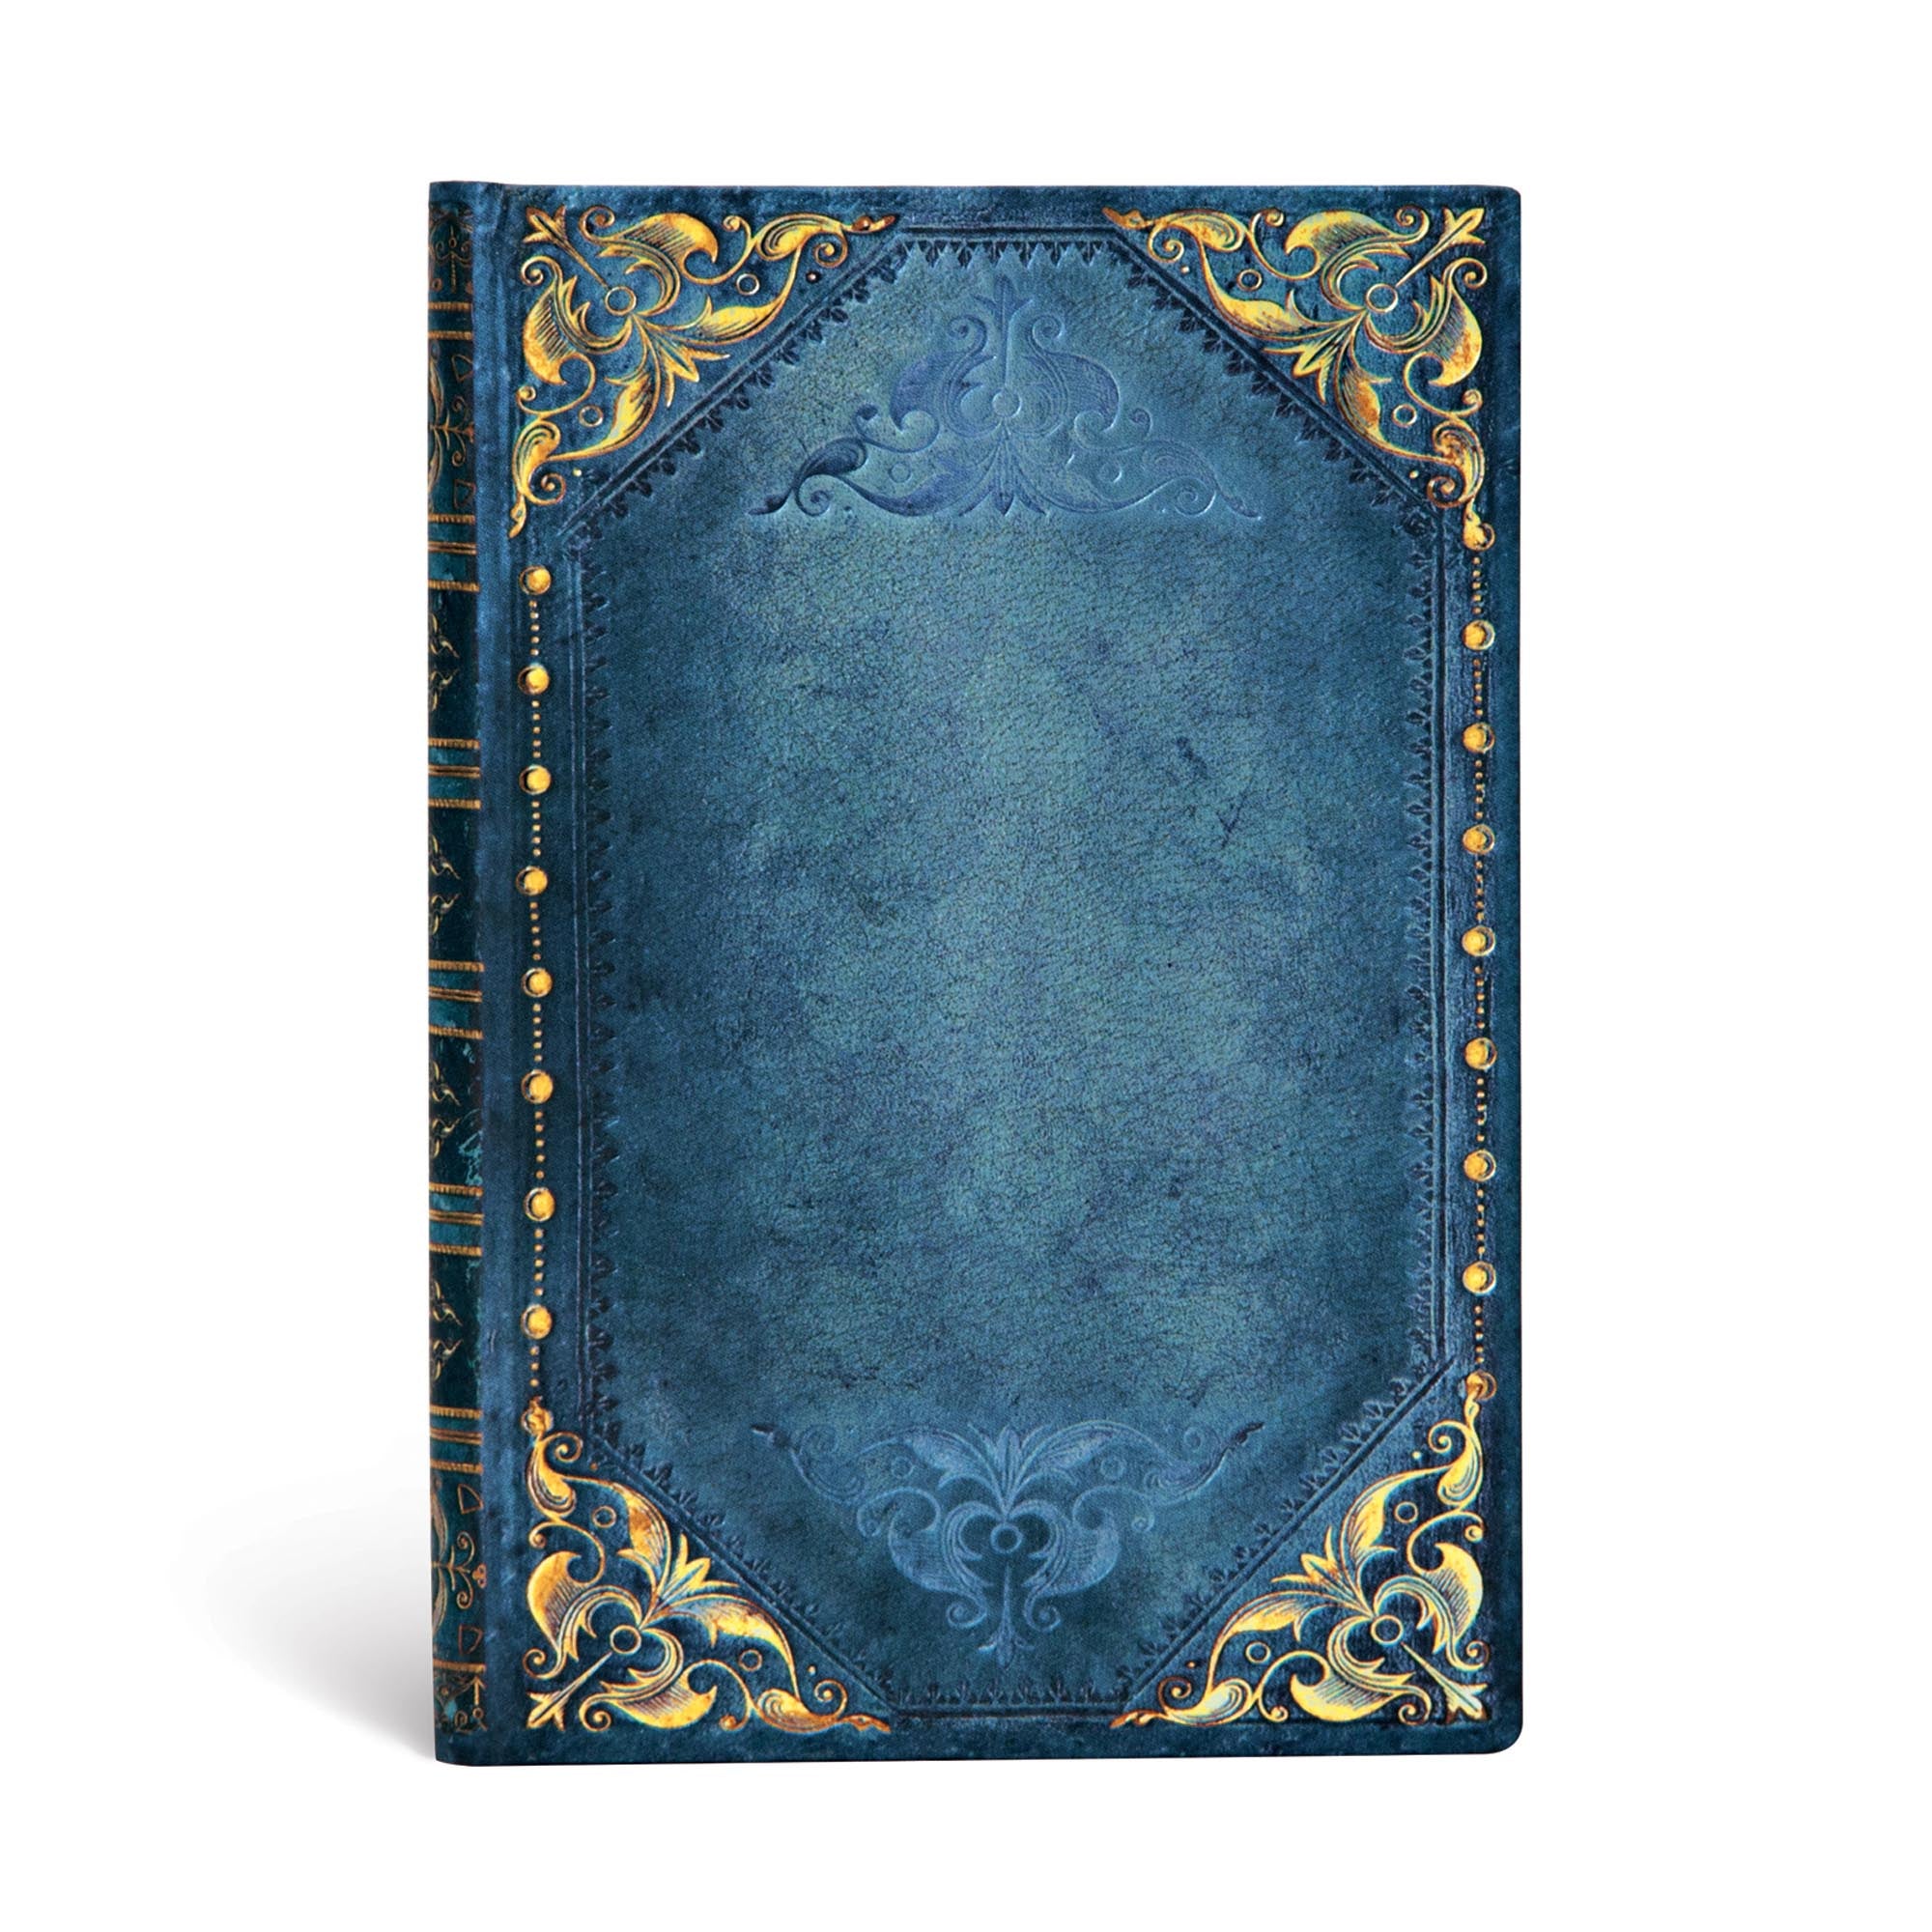 Paperblanks Peacock Punk Lined Mini Hardcover Journal    